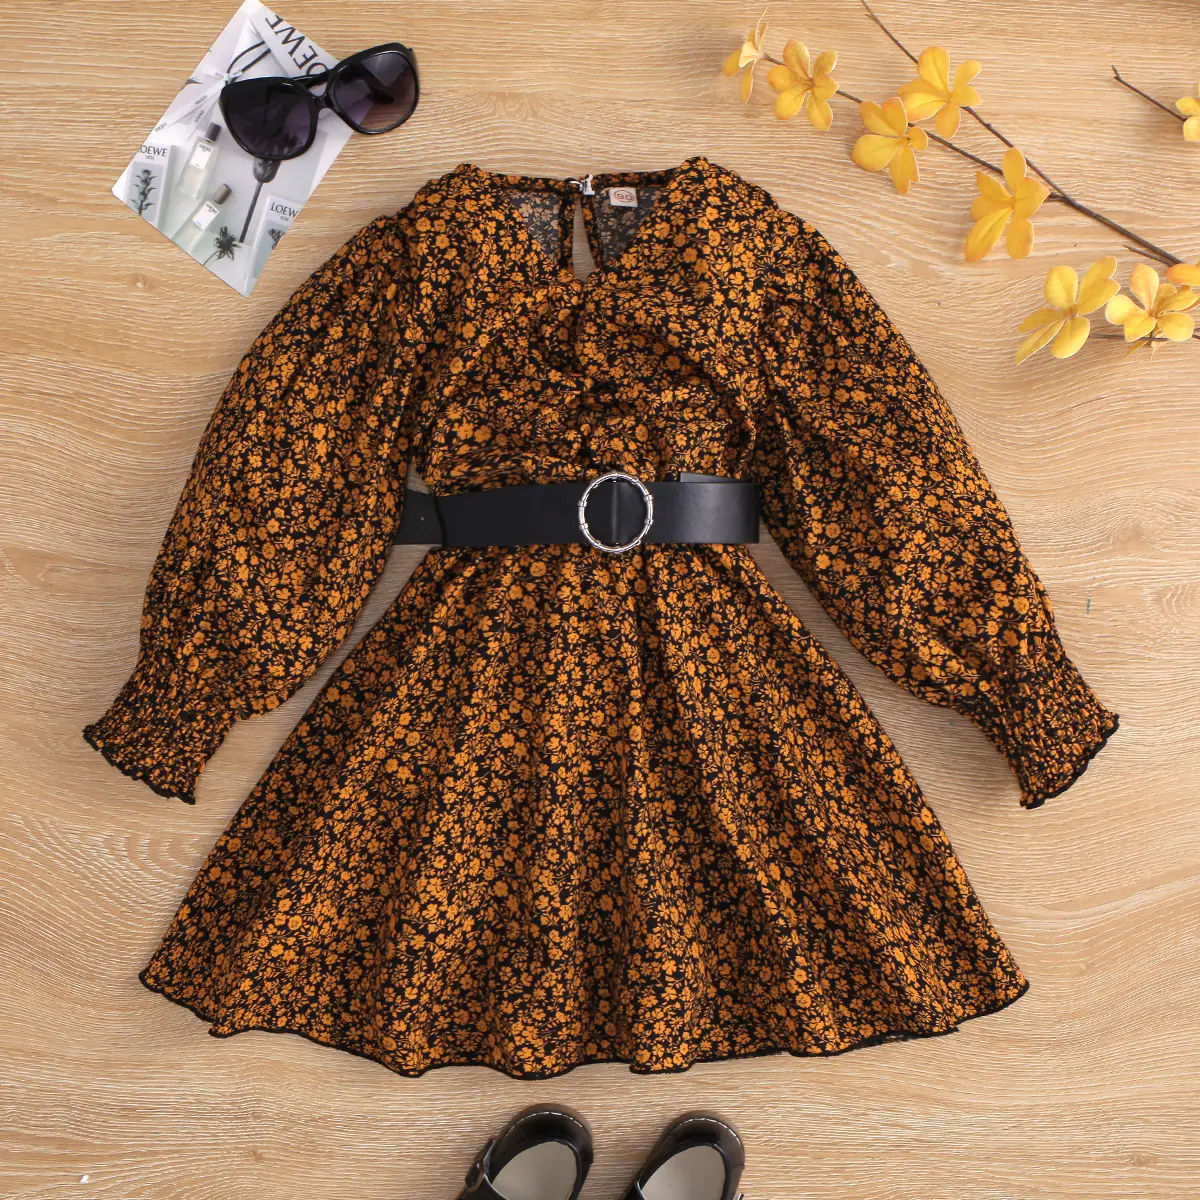 New fashion Girls autumn long sleeve ruffles casual floral dress with belt clothing for kids